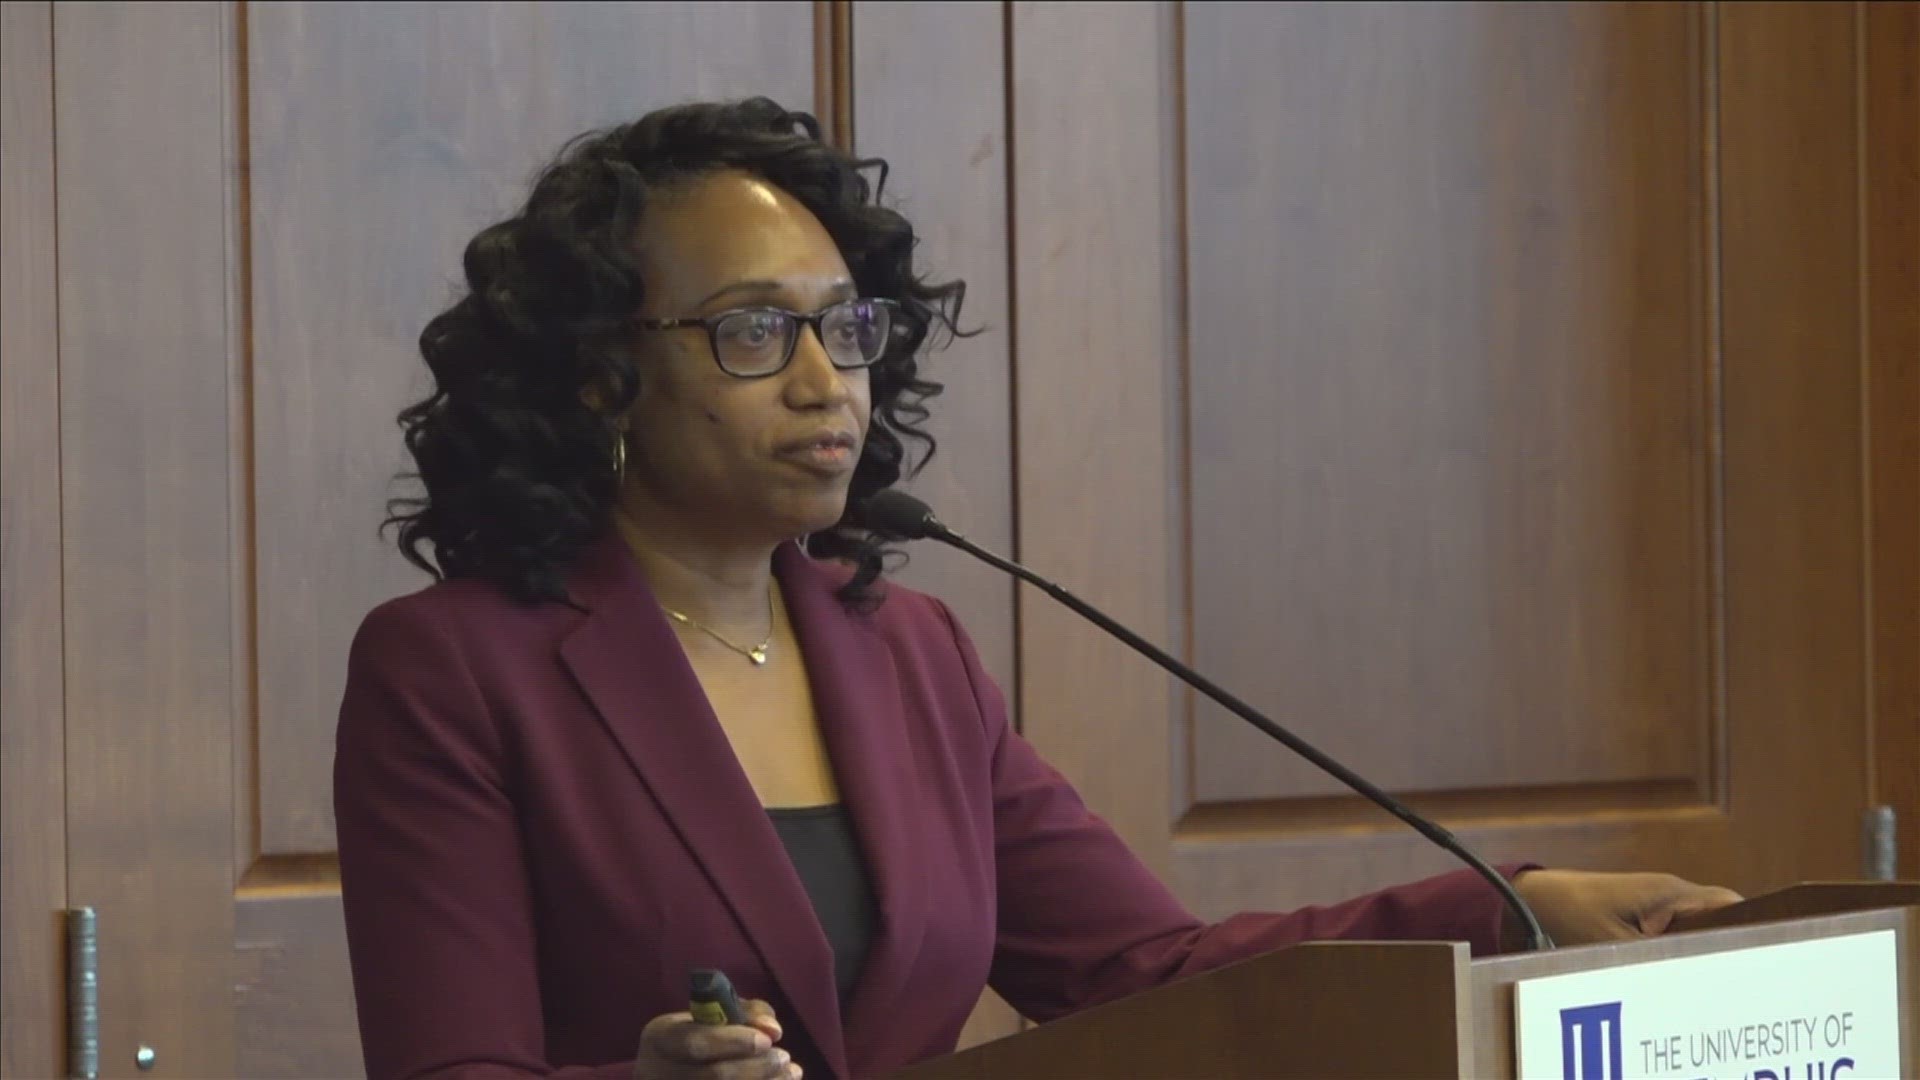 Monday, Shelby County Chief Public Defender Phyllis Aluko appeared before members of the state legislature, asking for almost $2.5 million in state funding.